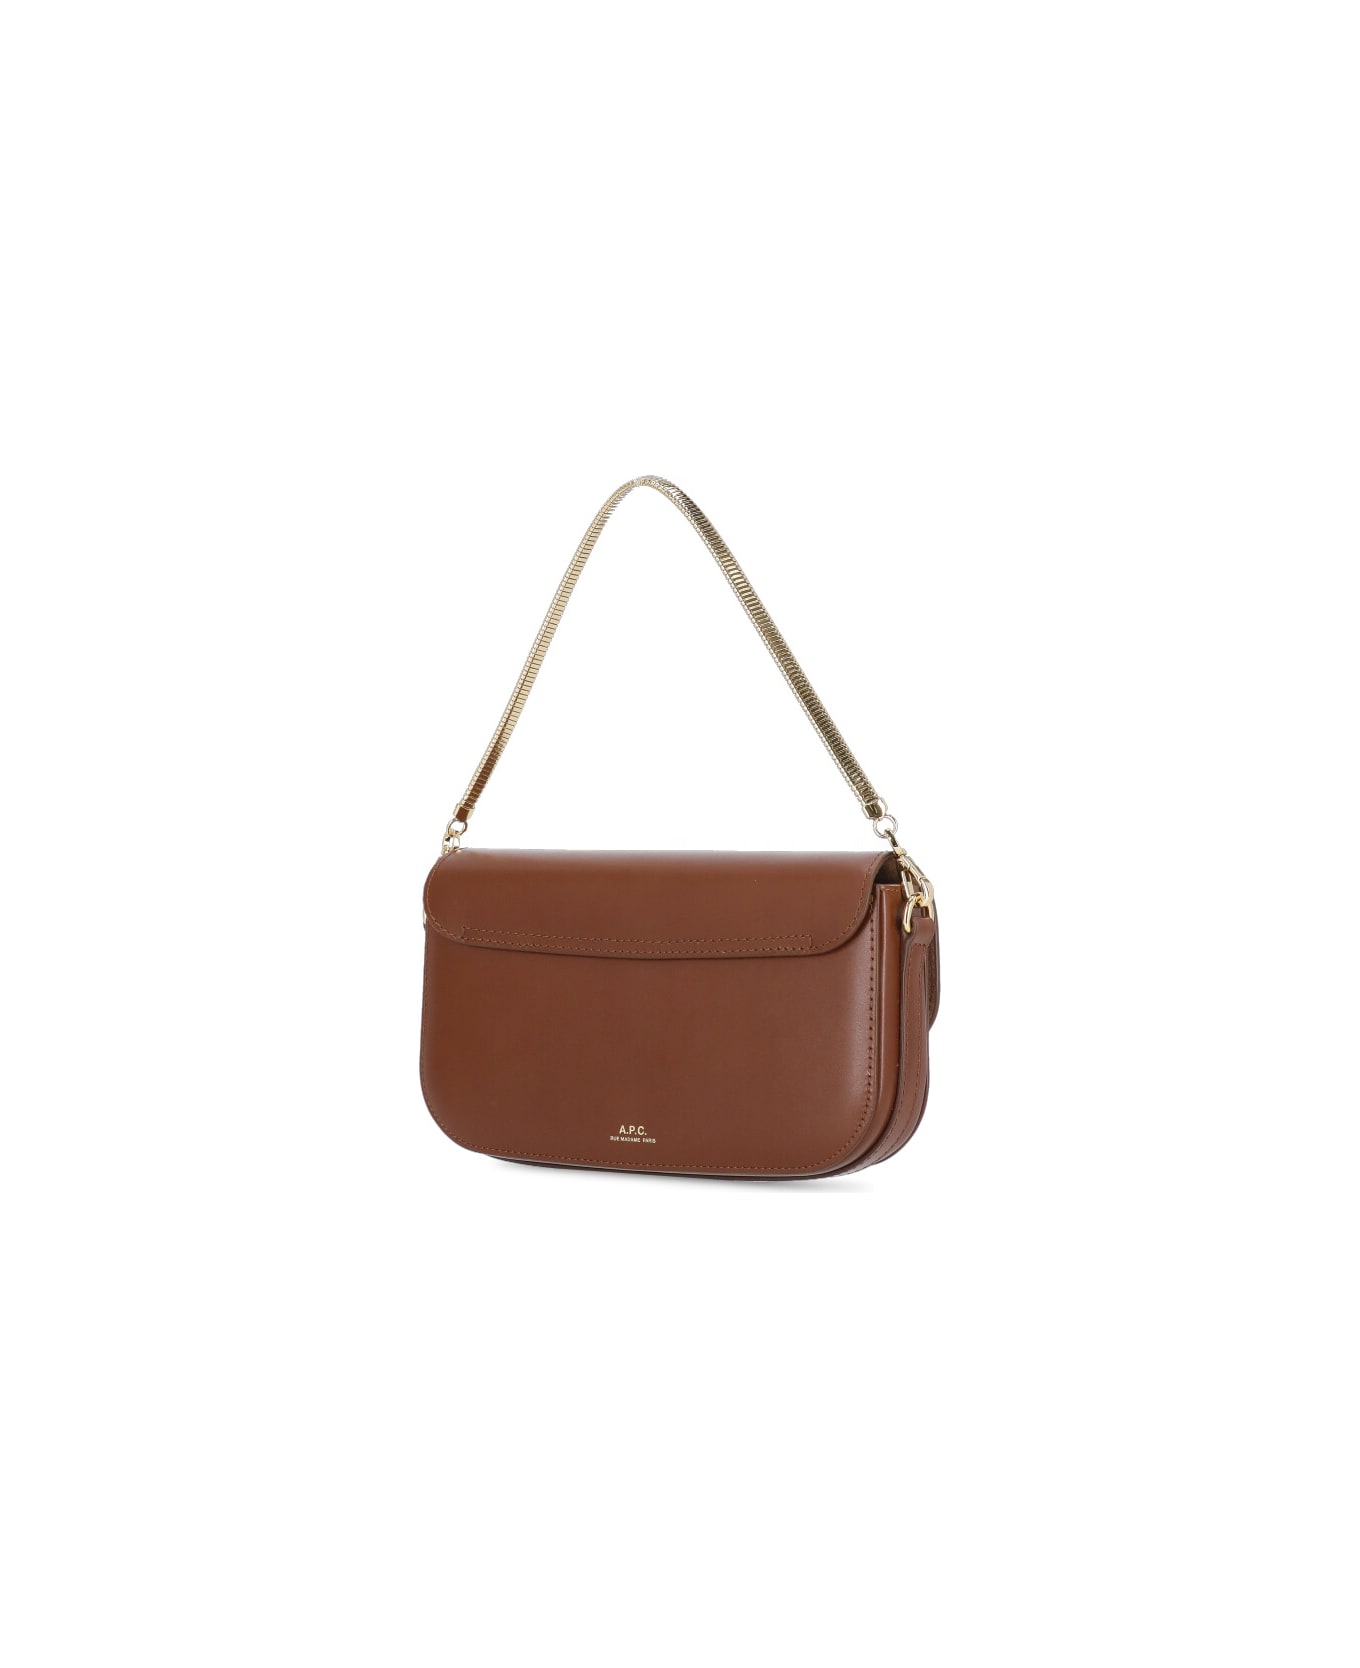 A.P.C. Grace Leather Clutch Bag - Brown ショルダーバッグ